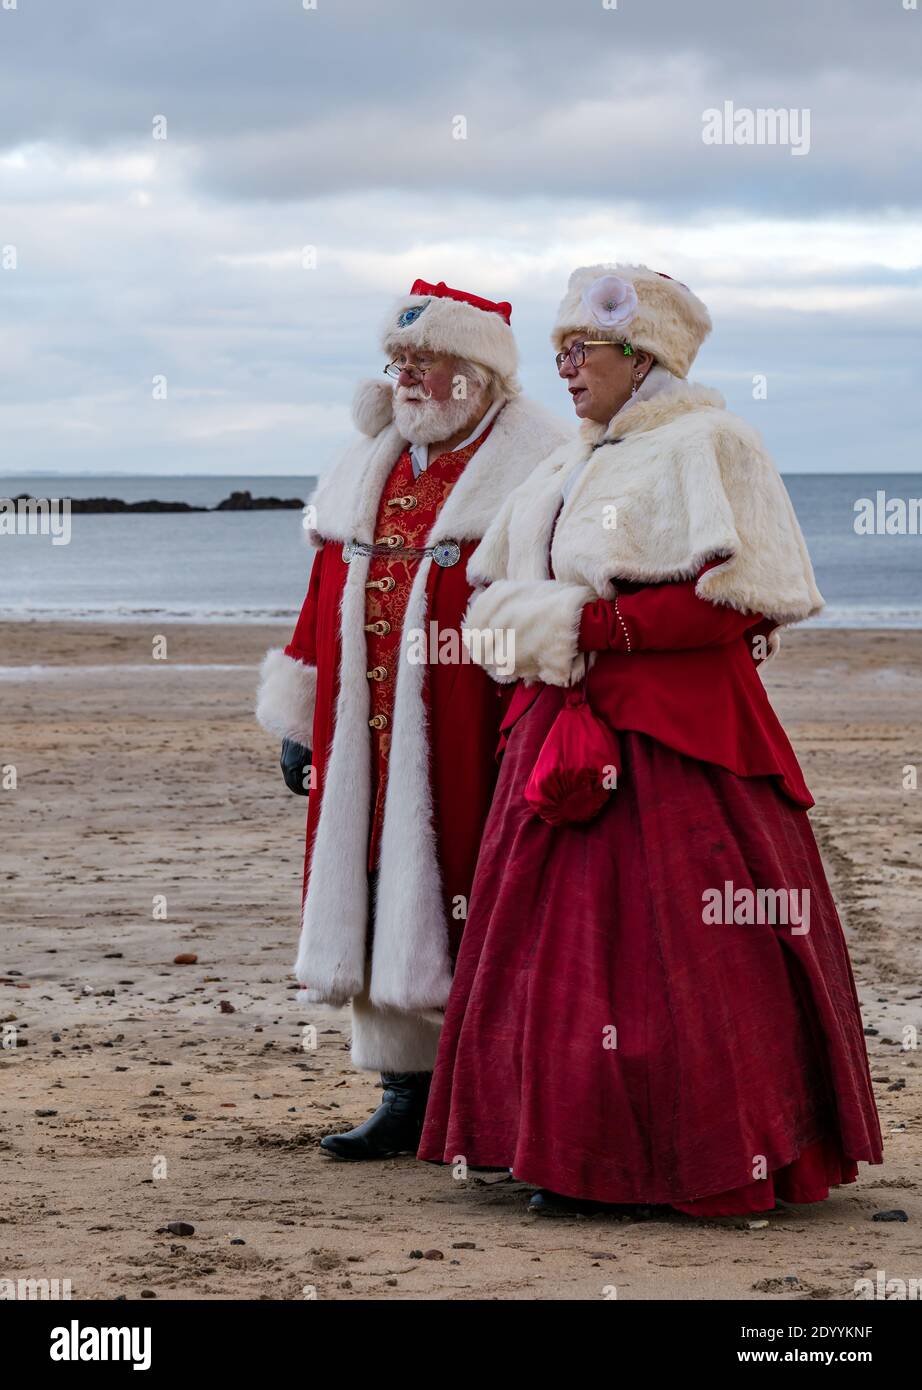 Couple dressed in Santa or Father Christmas and Mrs Claus costumes on beach, North Berwick, East Lothian, Scotland, UK Stock Photo